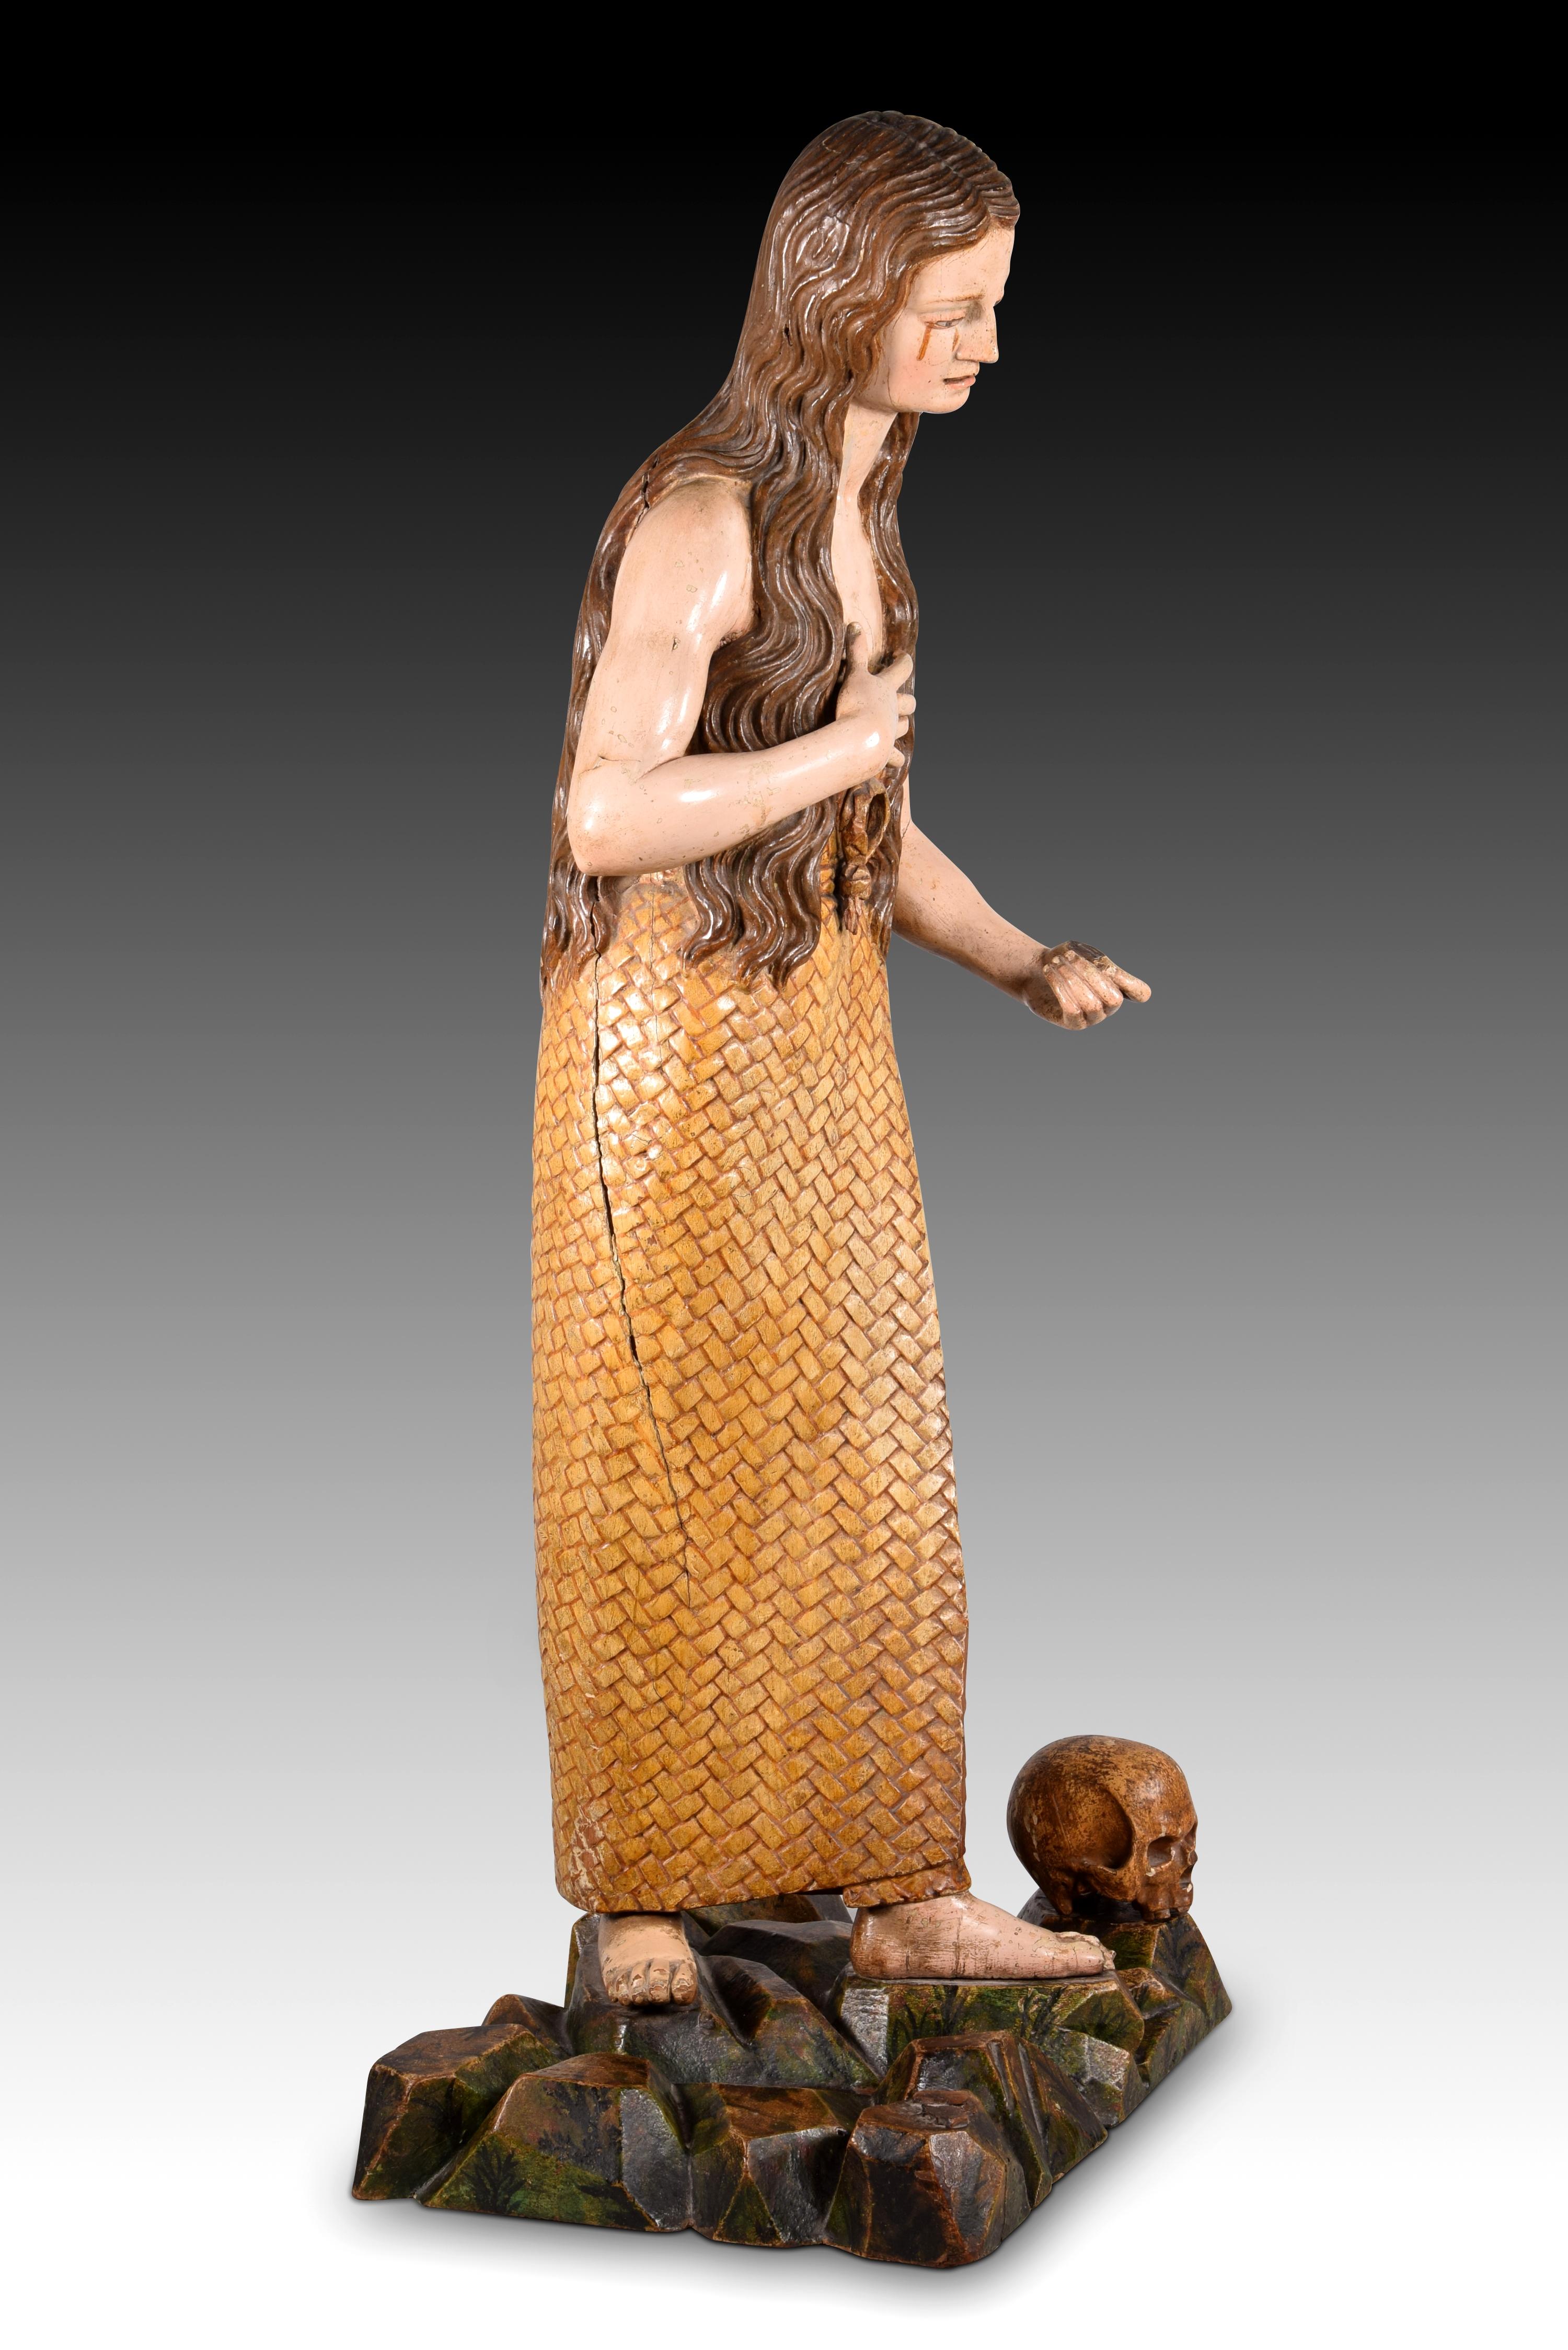 Baroque Mary Magdalene, Polychromed Wood, Spain, Ca Late 17th C, after Pedro de Mena